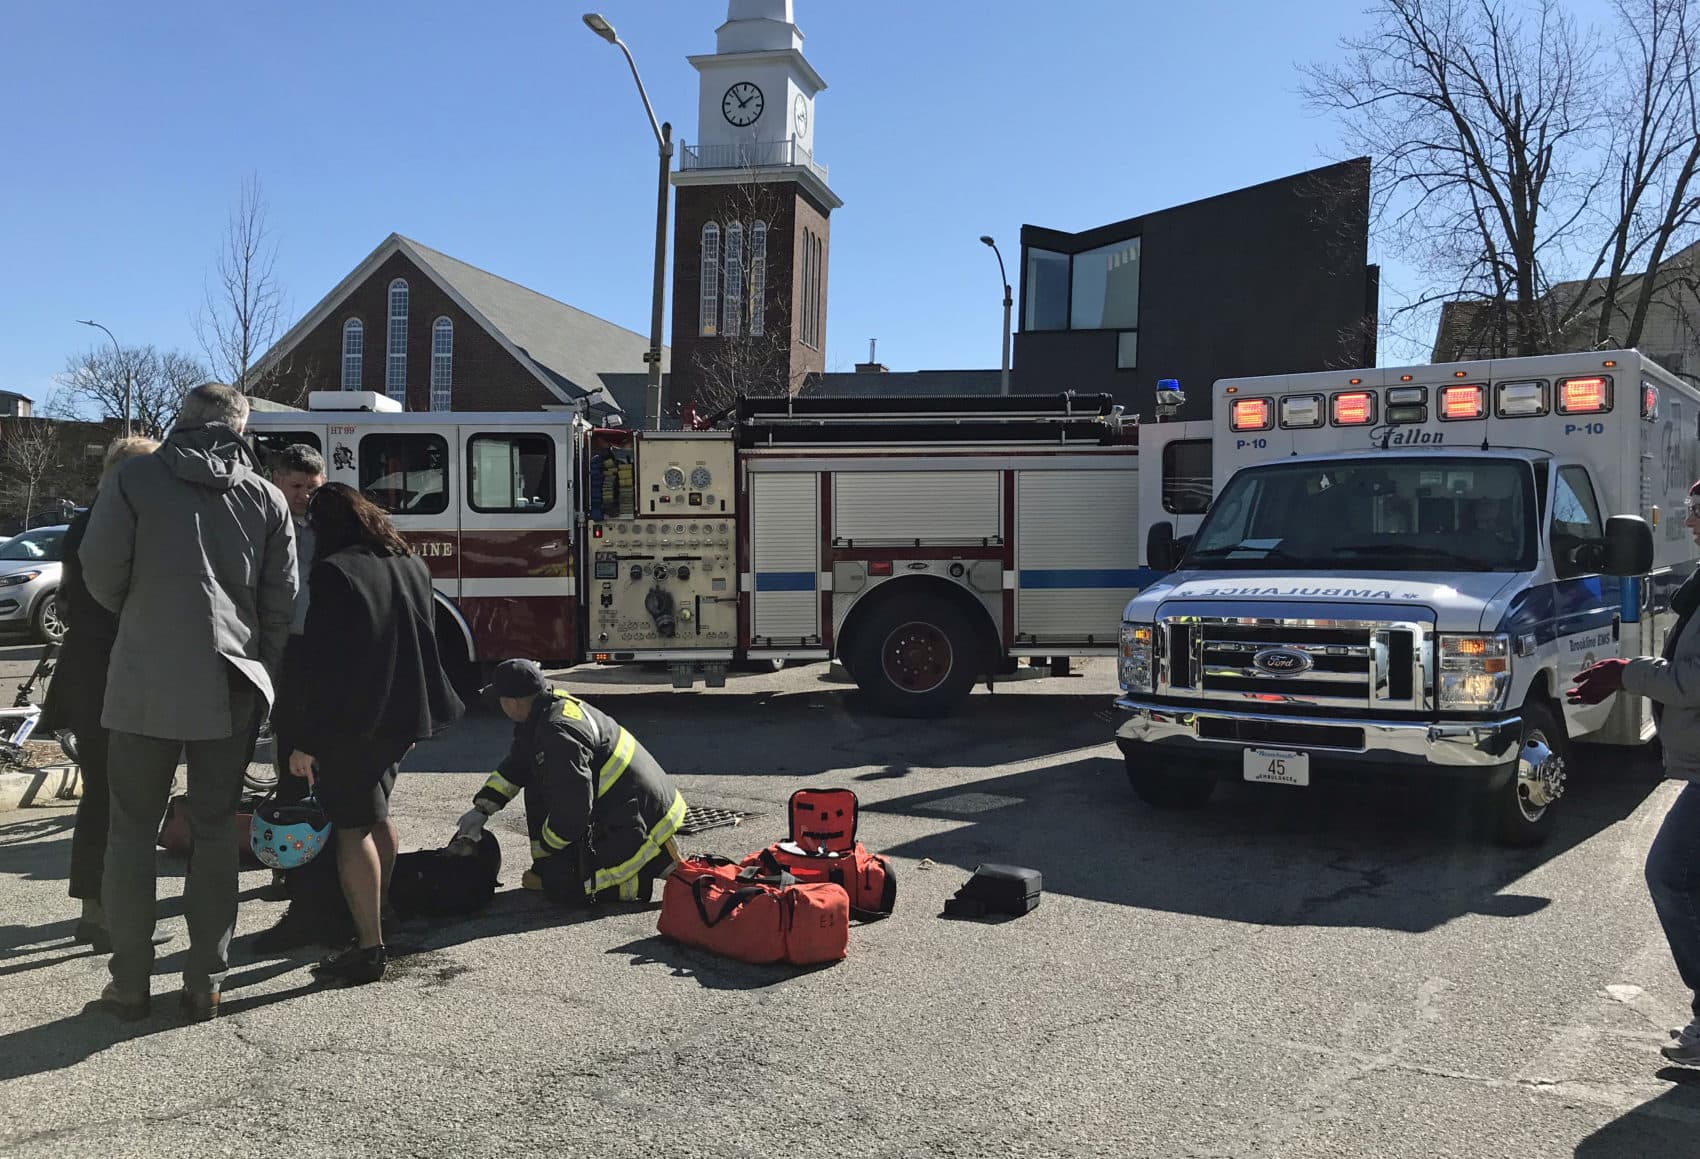 First responders treated a woman after an accident during a launch event for electric scooters in Brookline April 1. (Callum Borchers/WBUR)